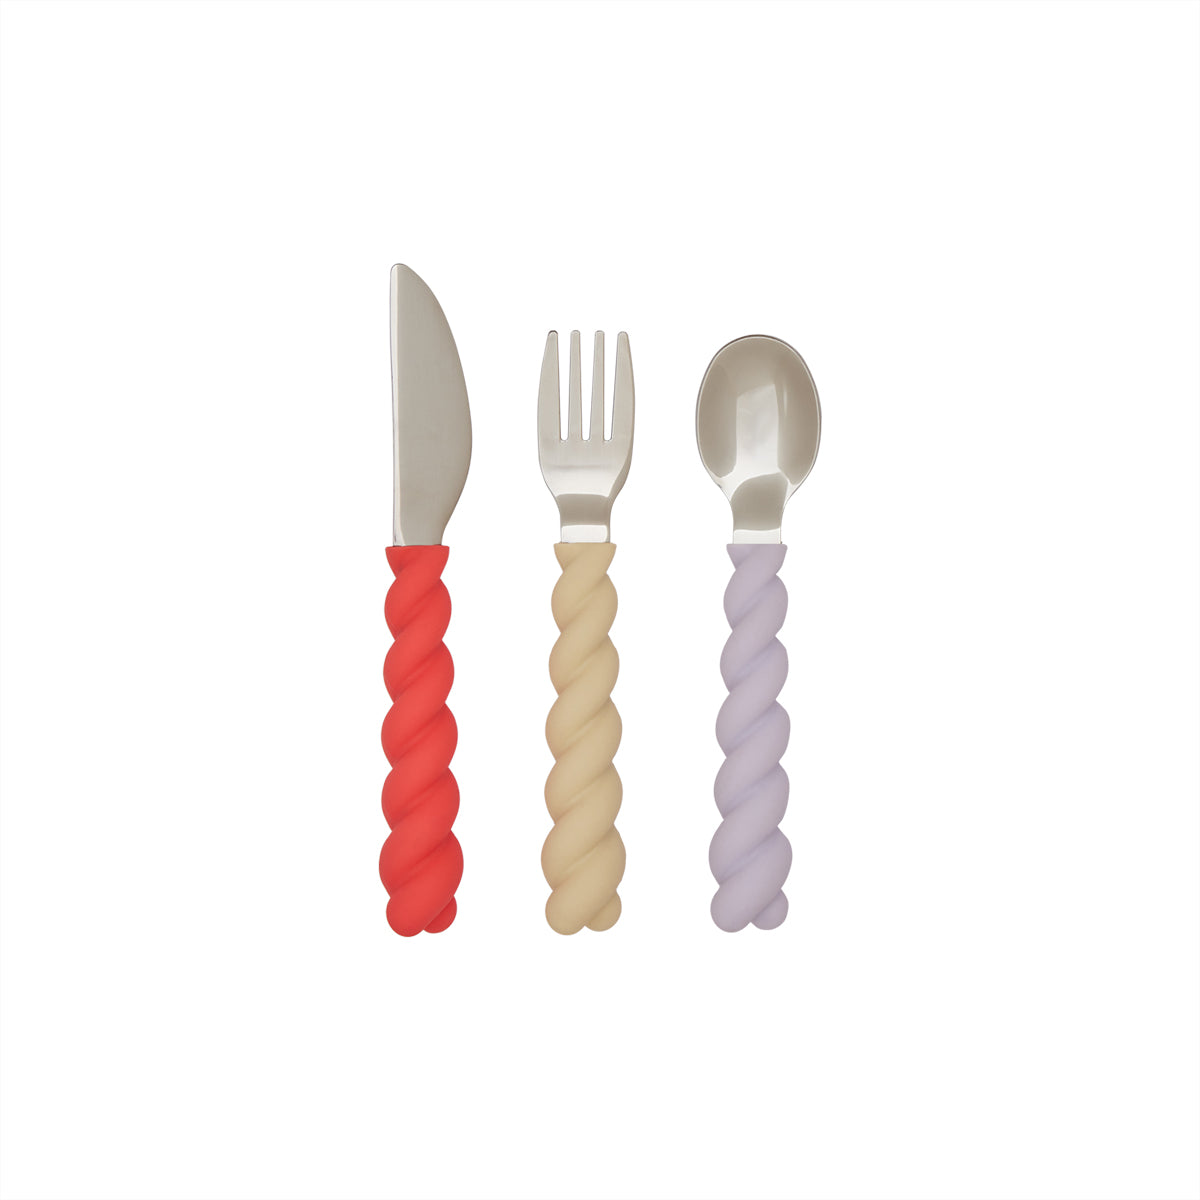 OYOY MINI Mellow Cutlery - Pack of 3 Cutlery 501 Lavender / Vanilla / Cherry Red